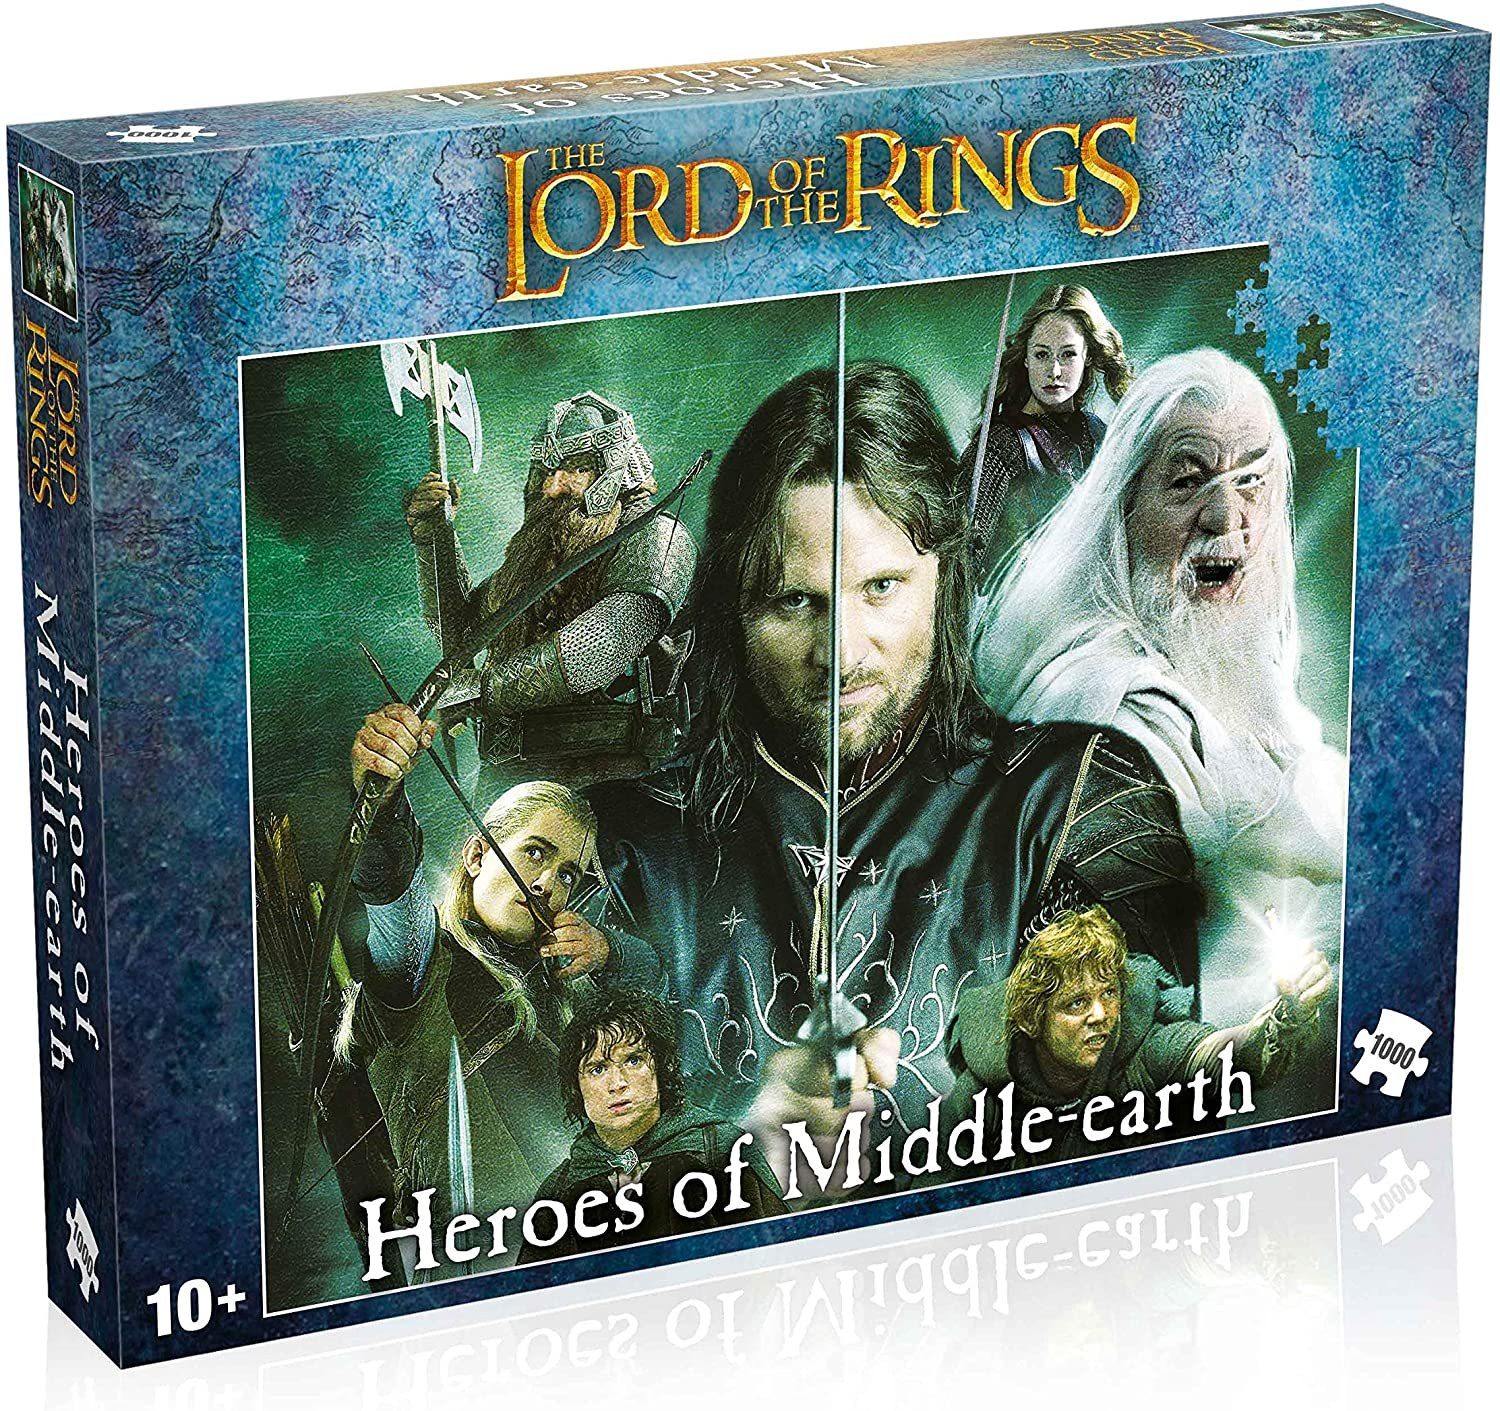 Winning Moves Puzzle Herr der Ringe - Puzzle »Heroes of Middle-Earth« 1000 Teile, Puzzleteile